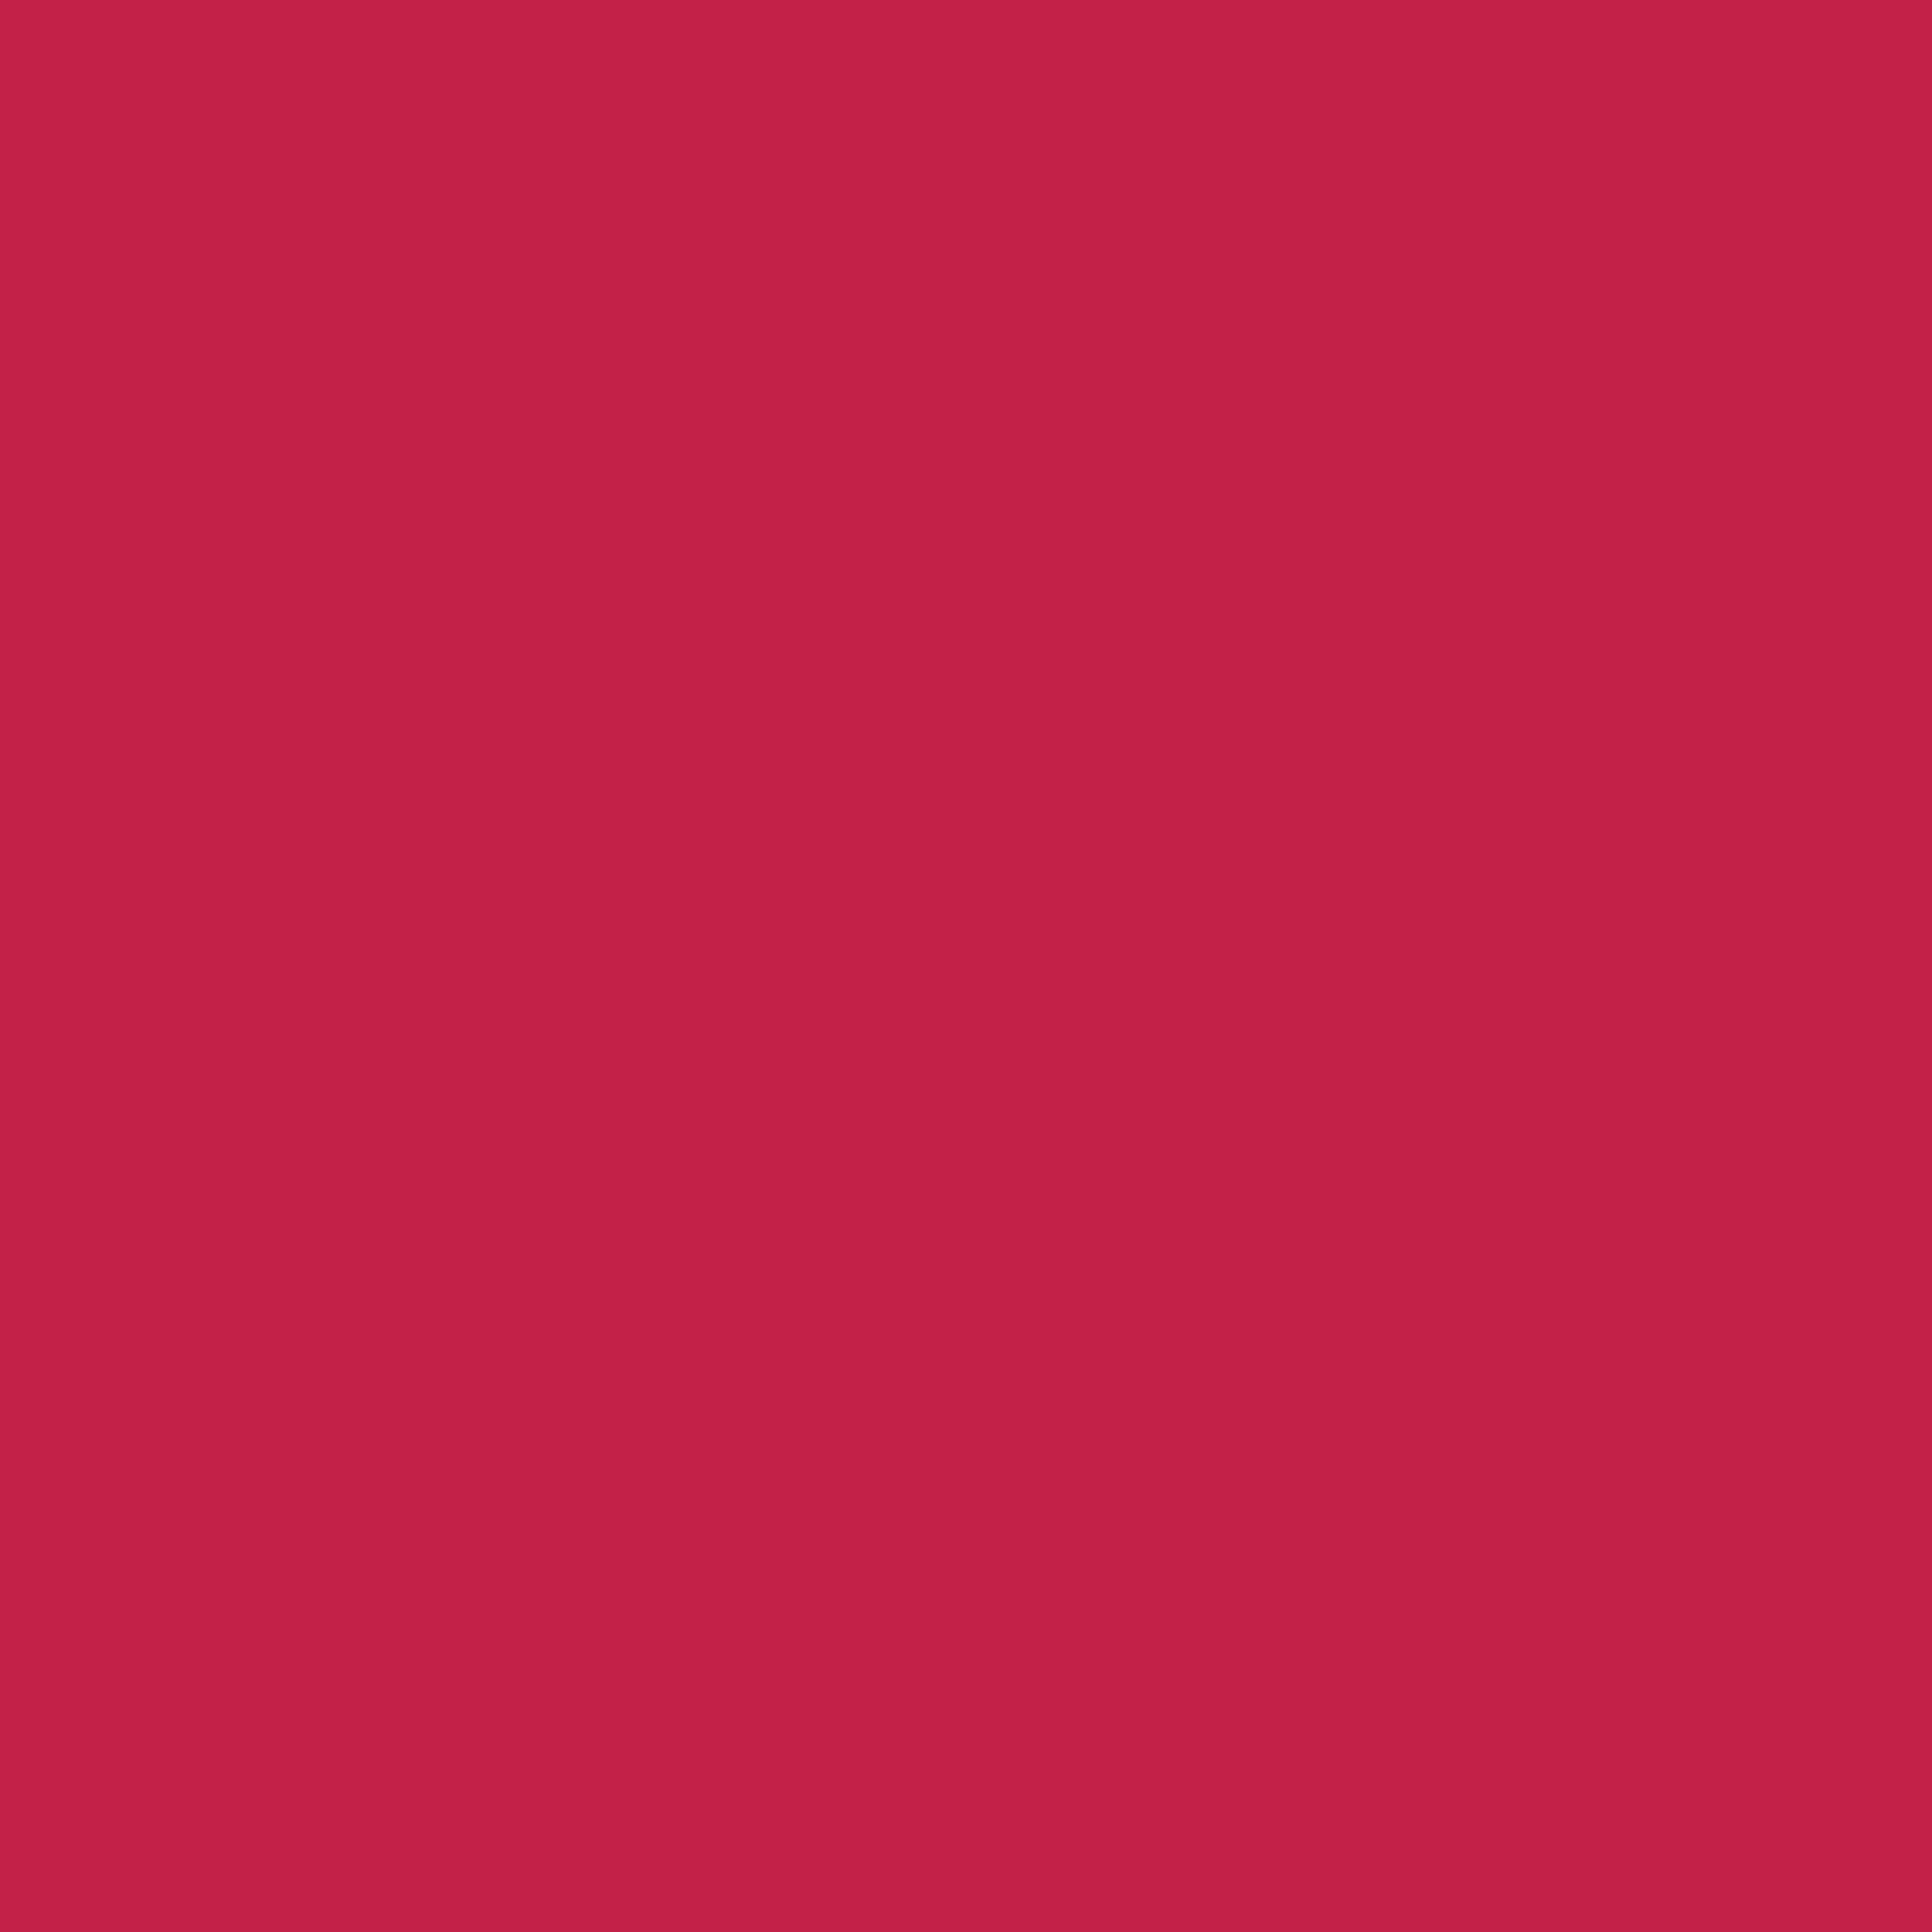 2732x2732 Bright Maroon Solid Color Background